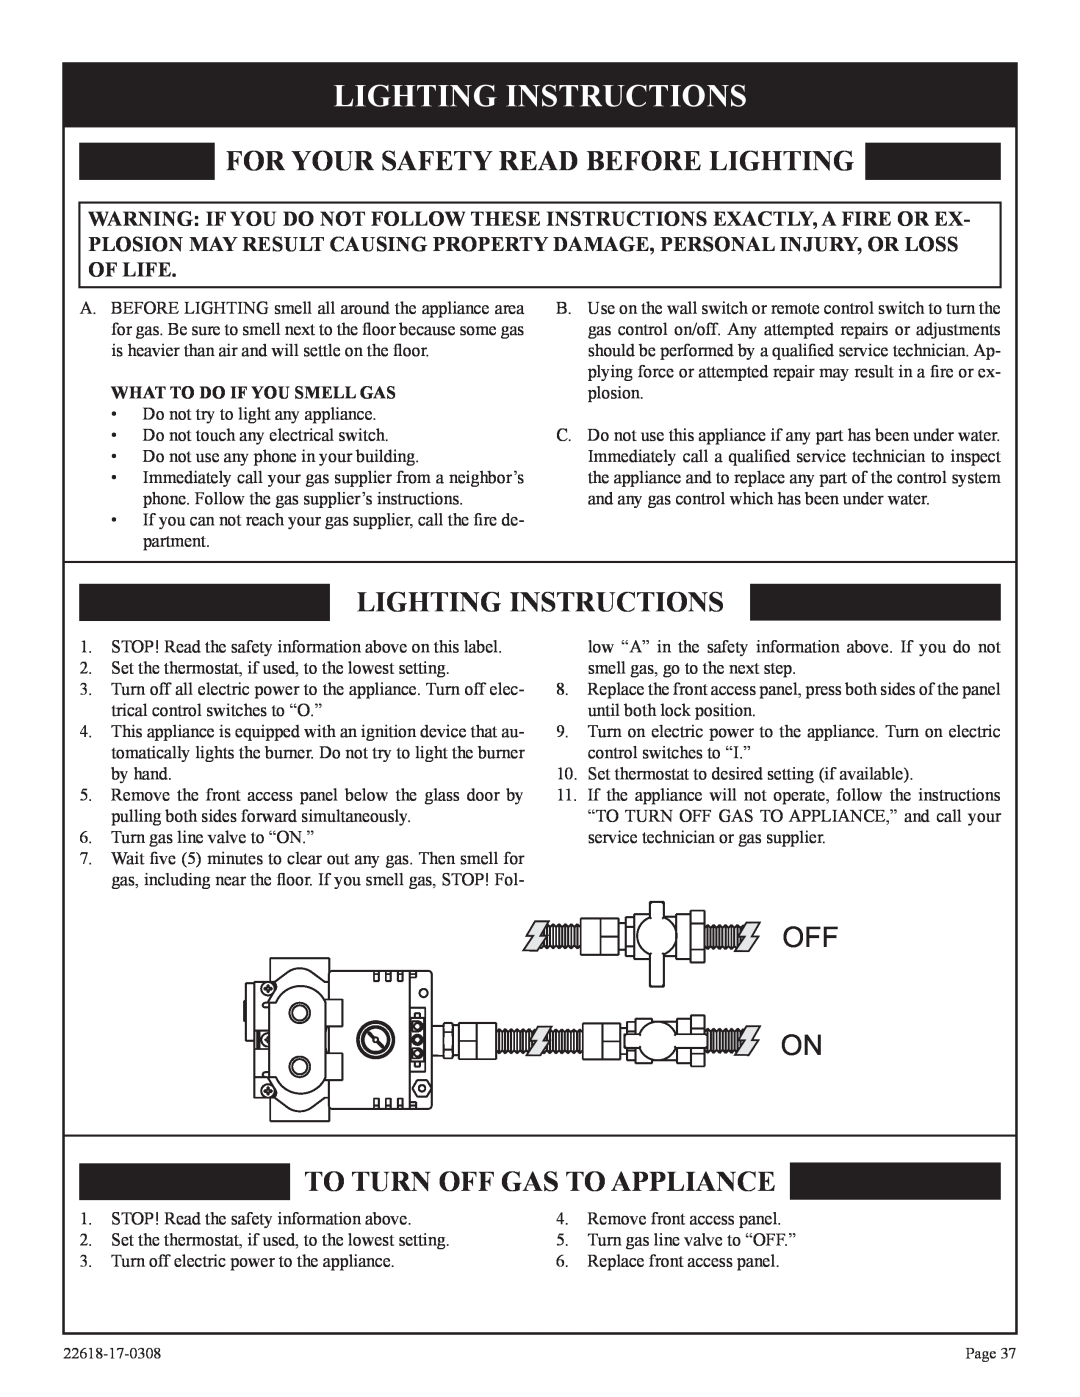 Empire Comfort Systems PV-28SV55-CN, PV-28SV50-BN, GN Lighting Instructions, For Your Safety Read Before Lighting, Off On 